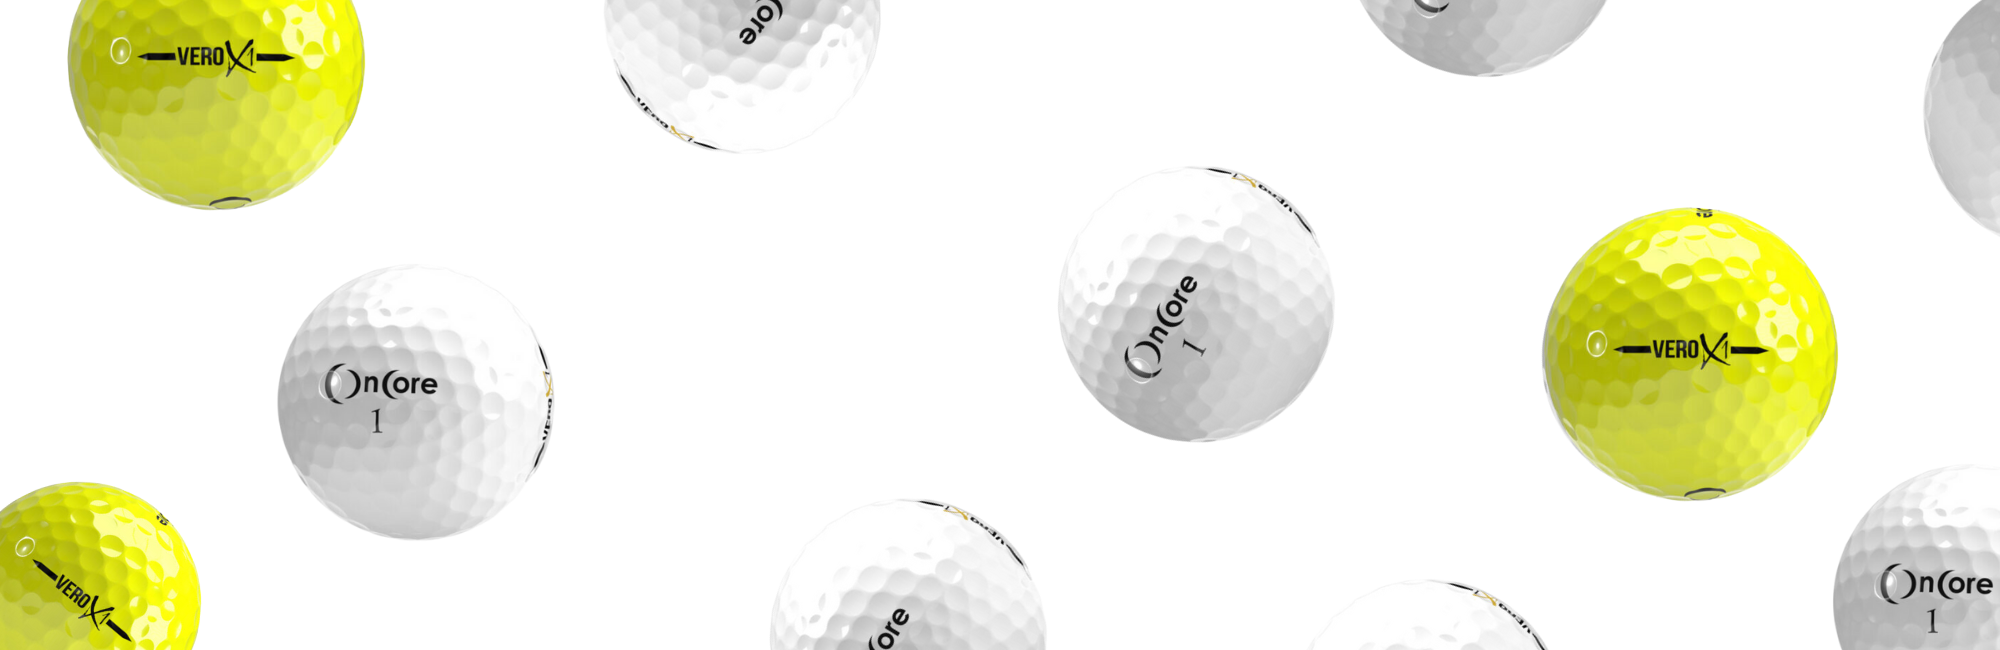 OnCore Vero 2 Golf Balls by Vertical Groove Golf